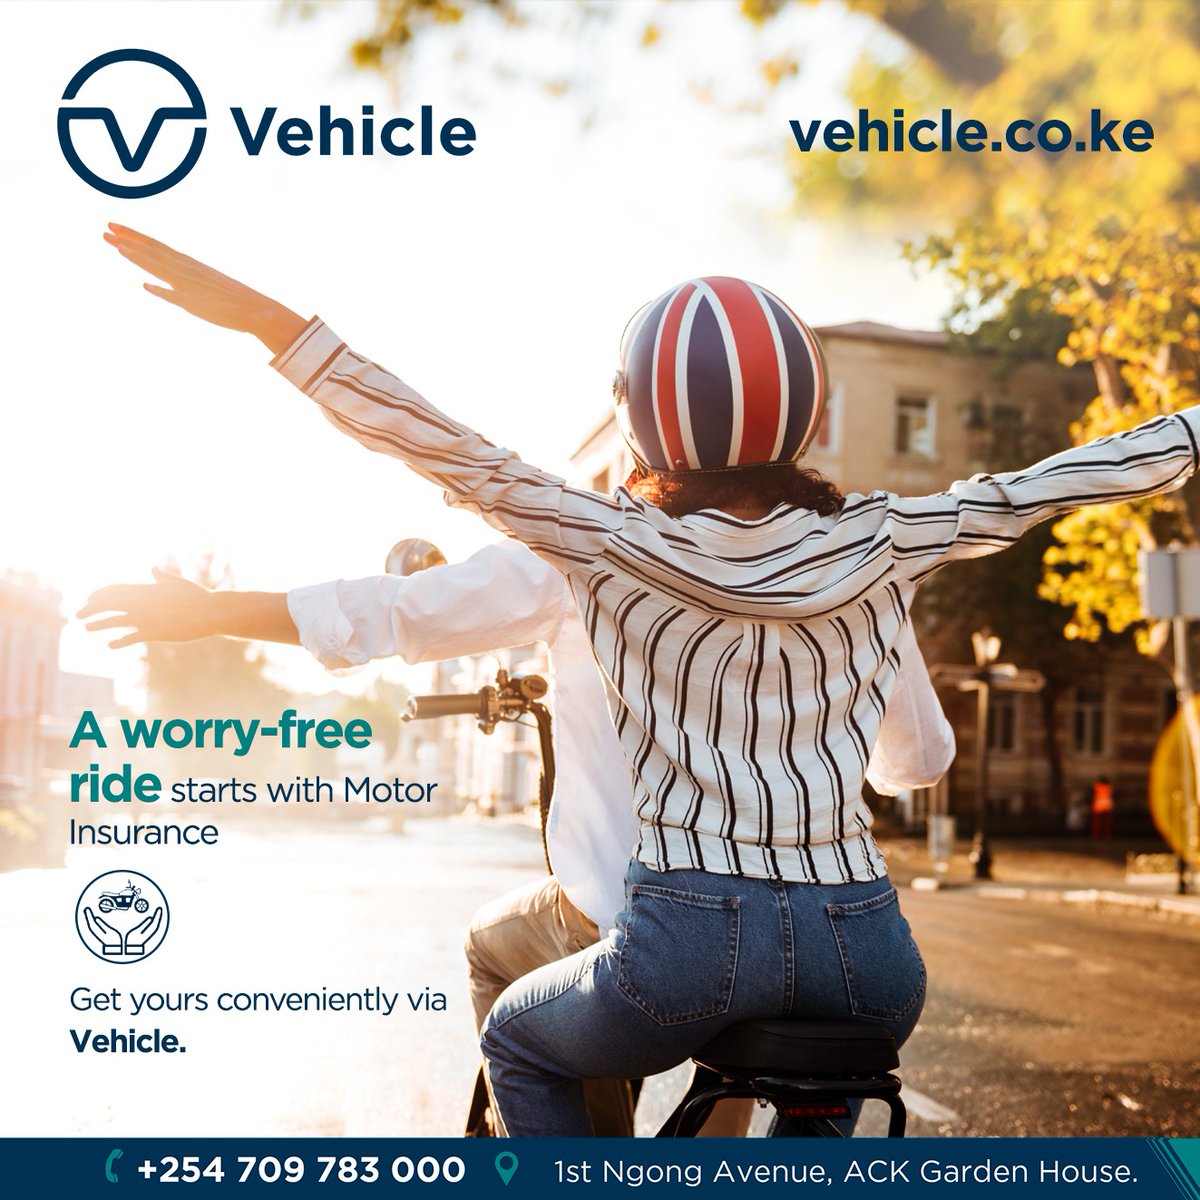 Stay covered from the risks that come with driving along the road by getting Motor Insurance.

#Vehicle #motorinsurance #InsuranceCover #kenyans